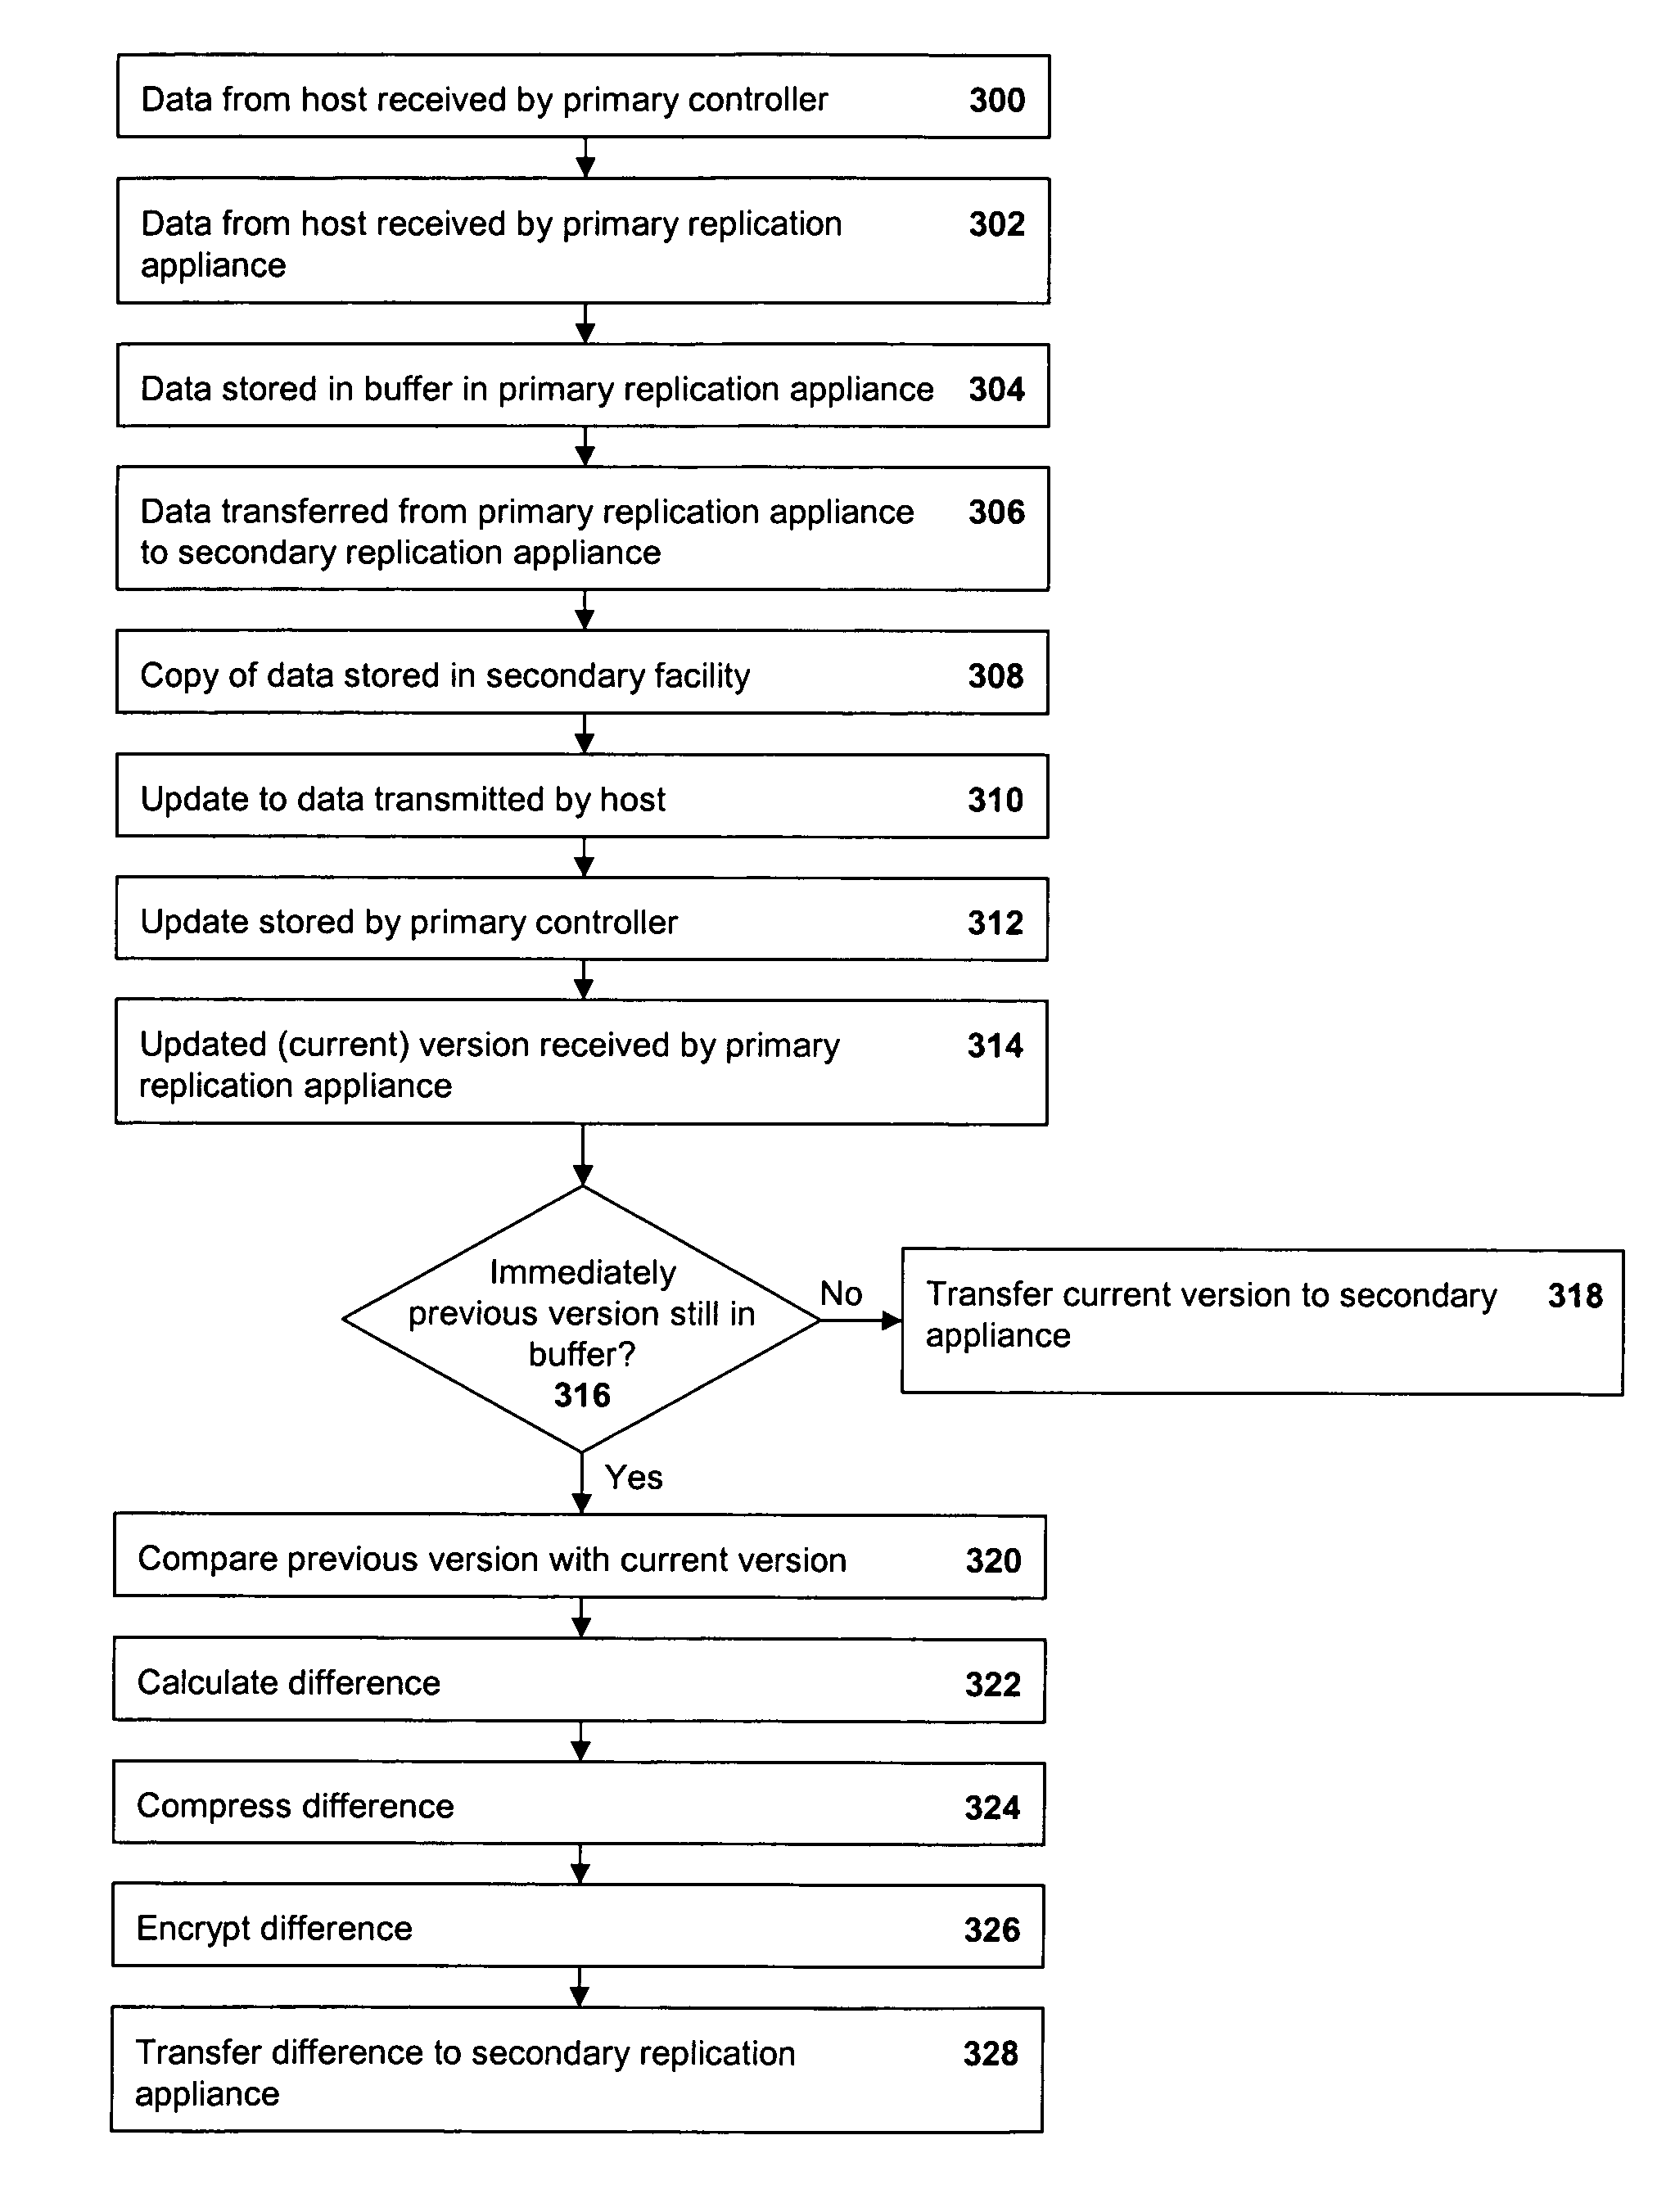 Transferring data from a primary data replication appliance in a primary data facility to a secondary data replication appliance in a secondary data facility